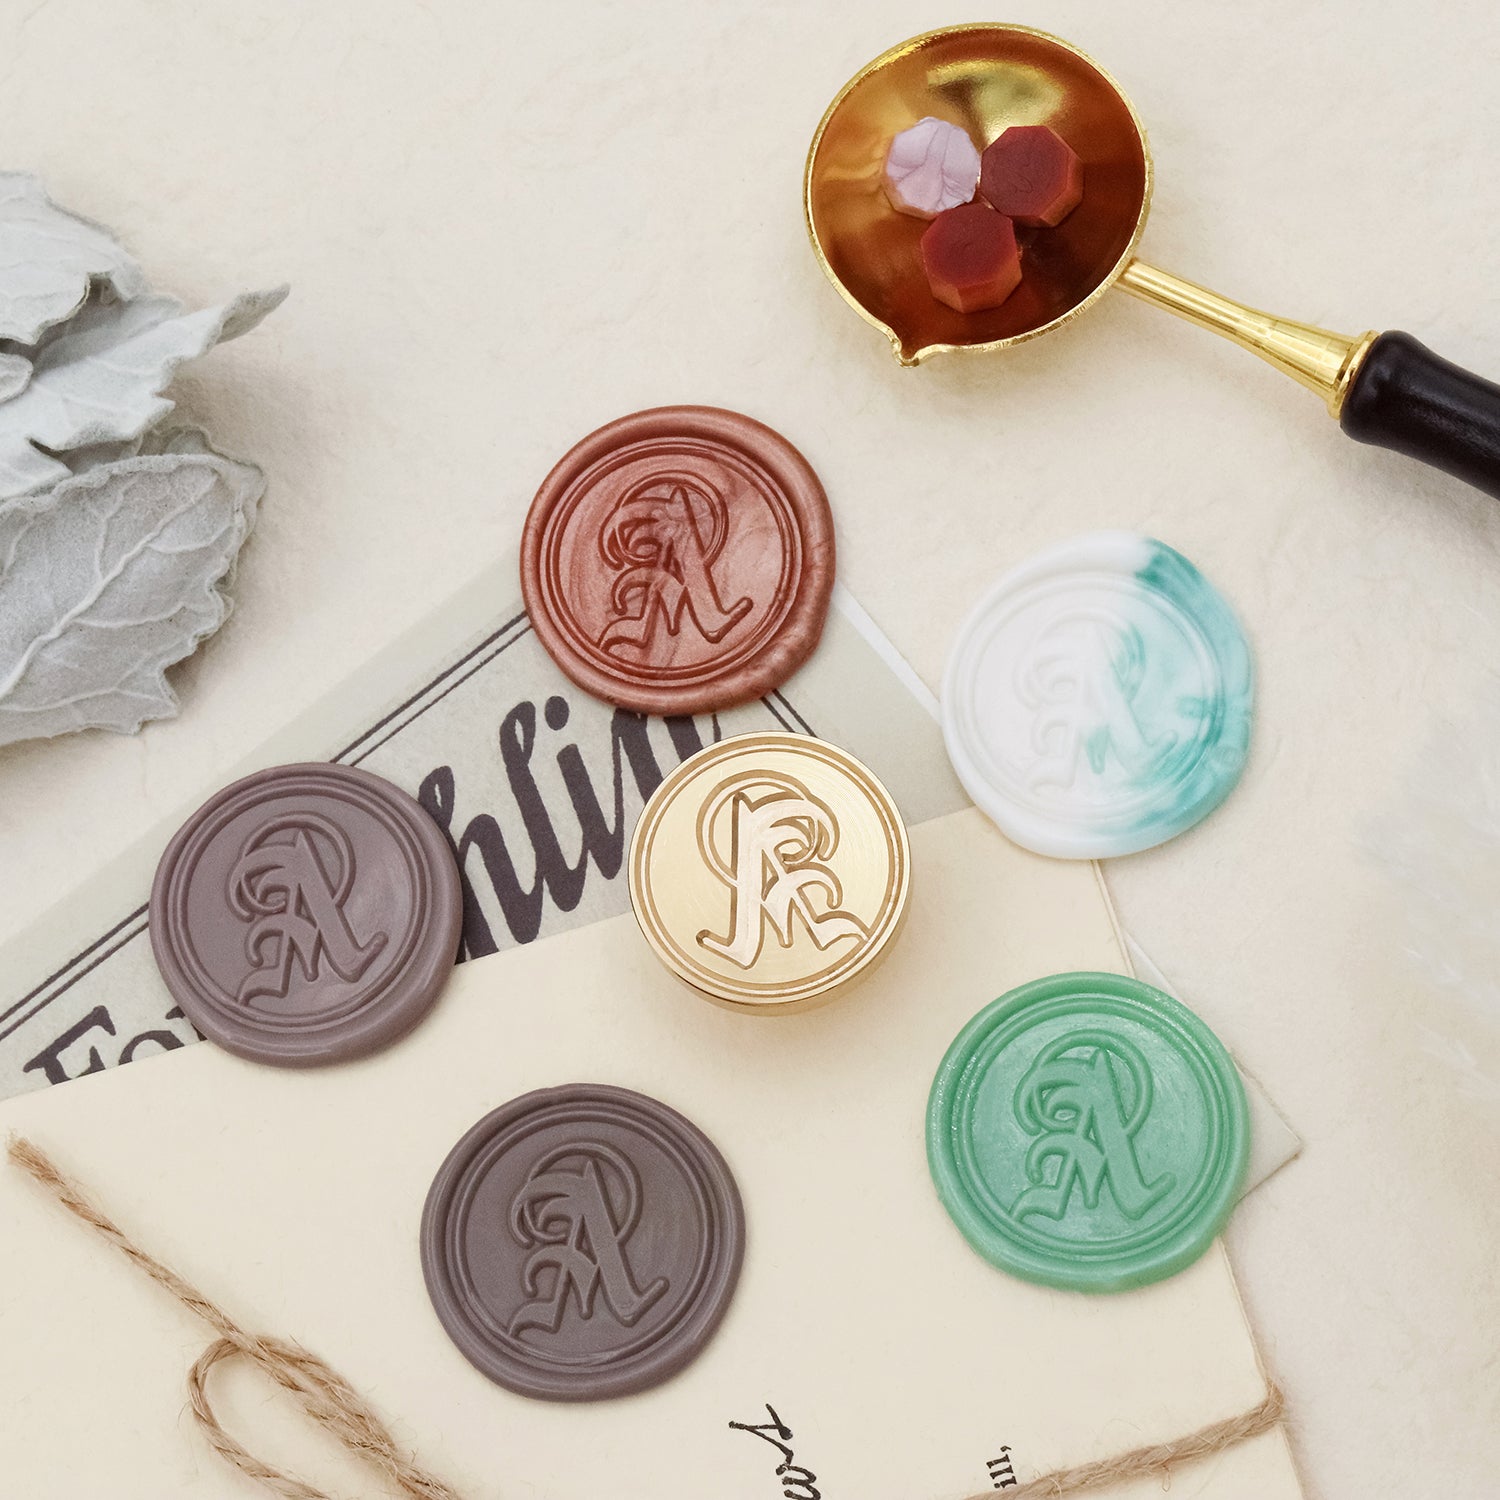 Wax Seal Stamp Set, European Style Wax Seal Stamp Kit Gift Box Set, Vintage Personalized  Wax Seal Stamp Letter Cards Invitations - AliExpress